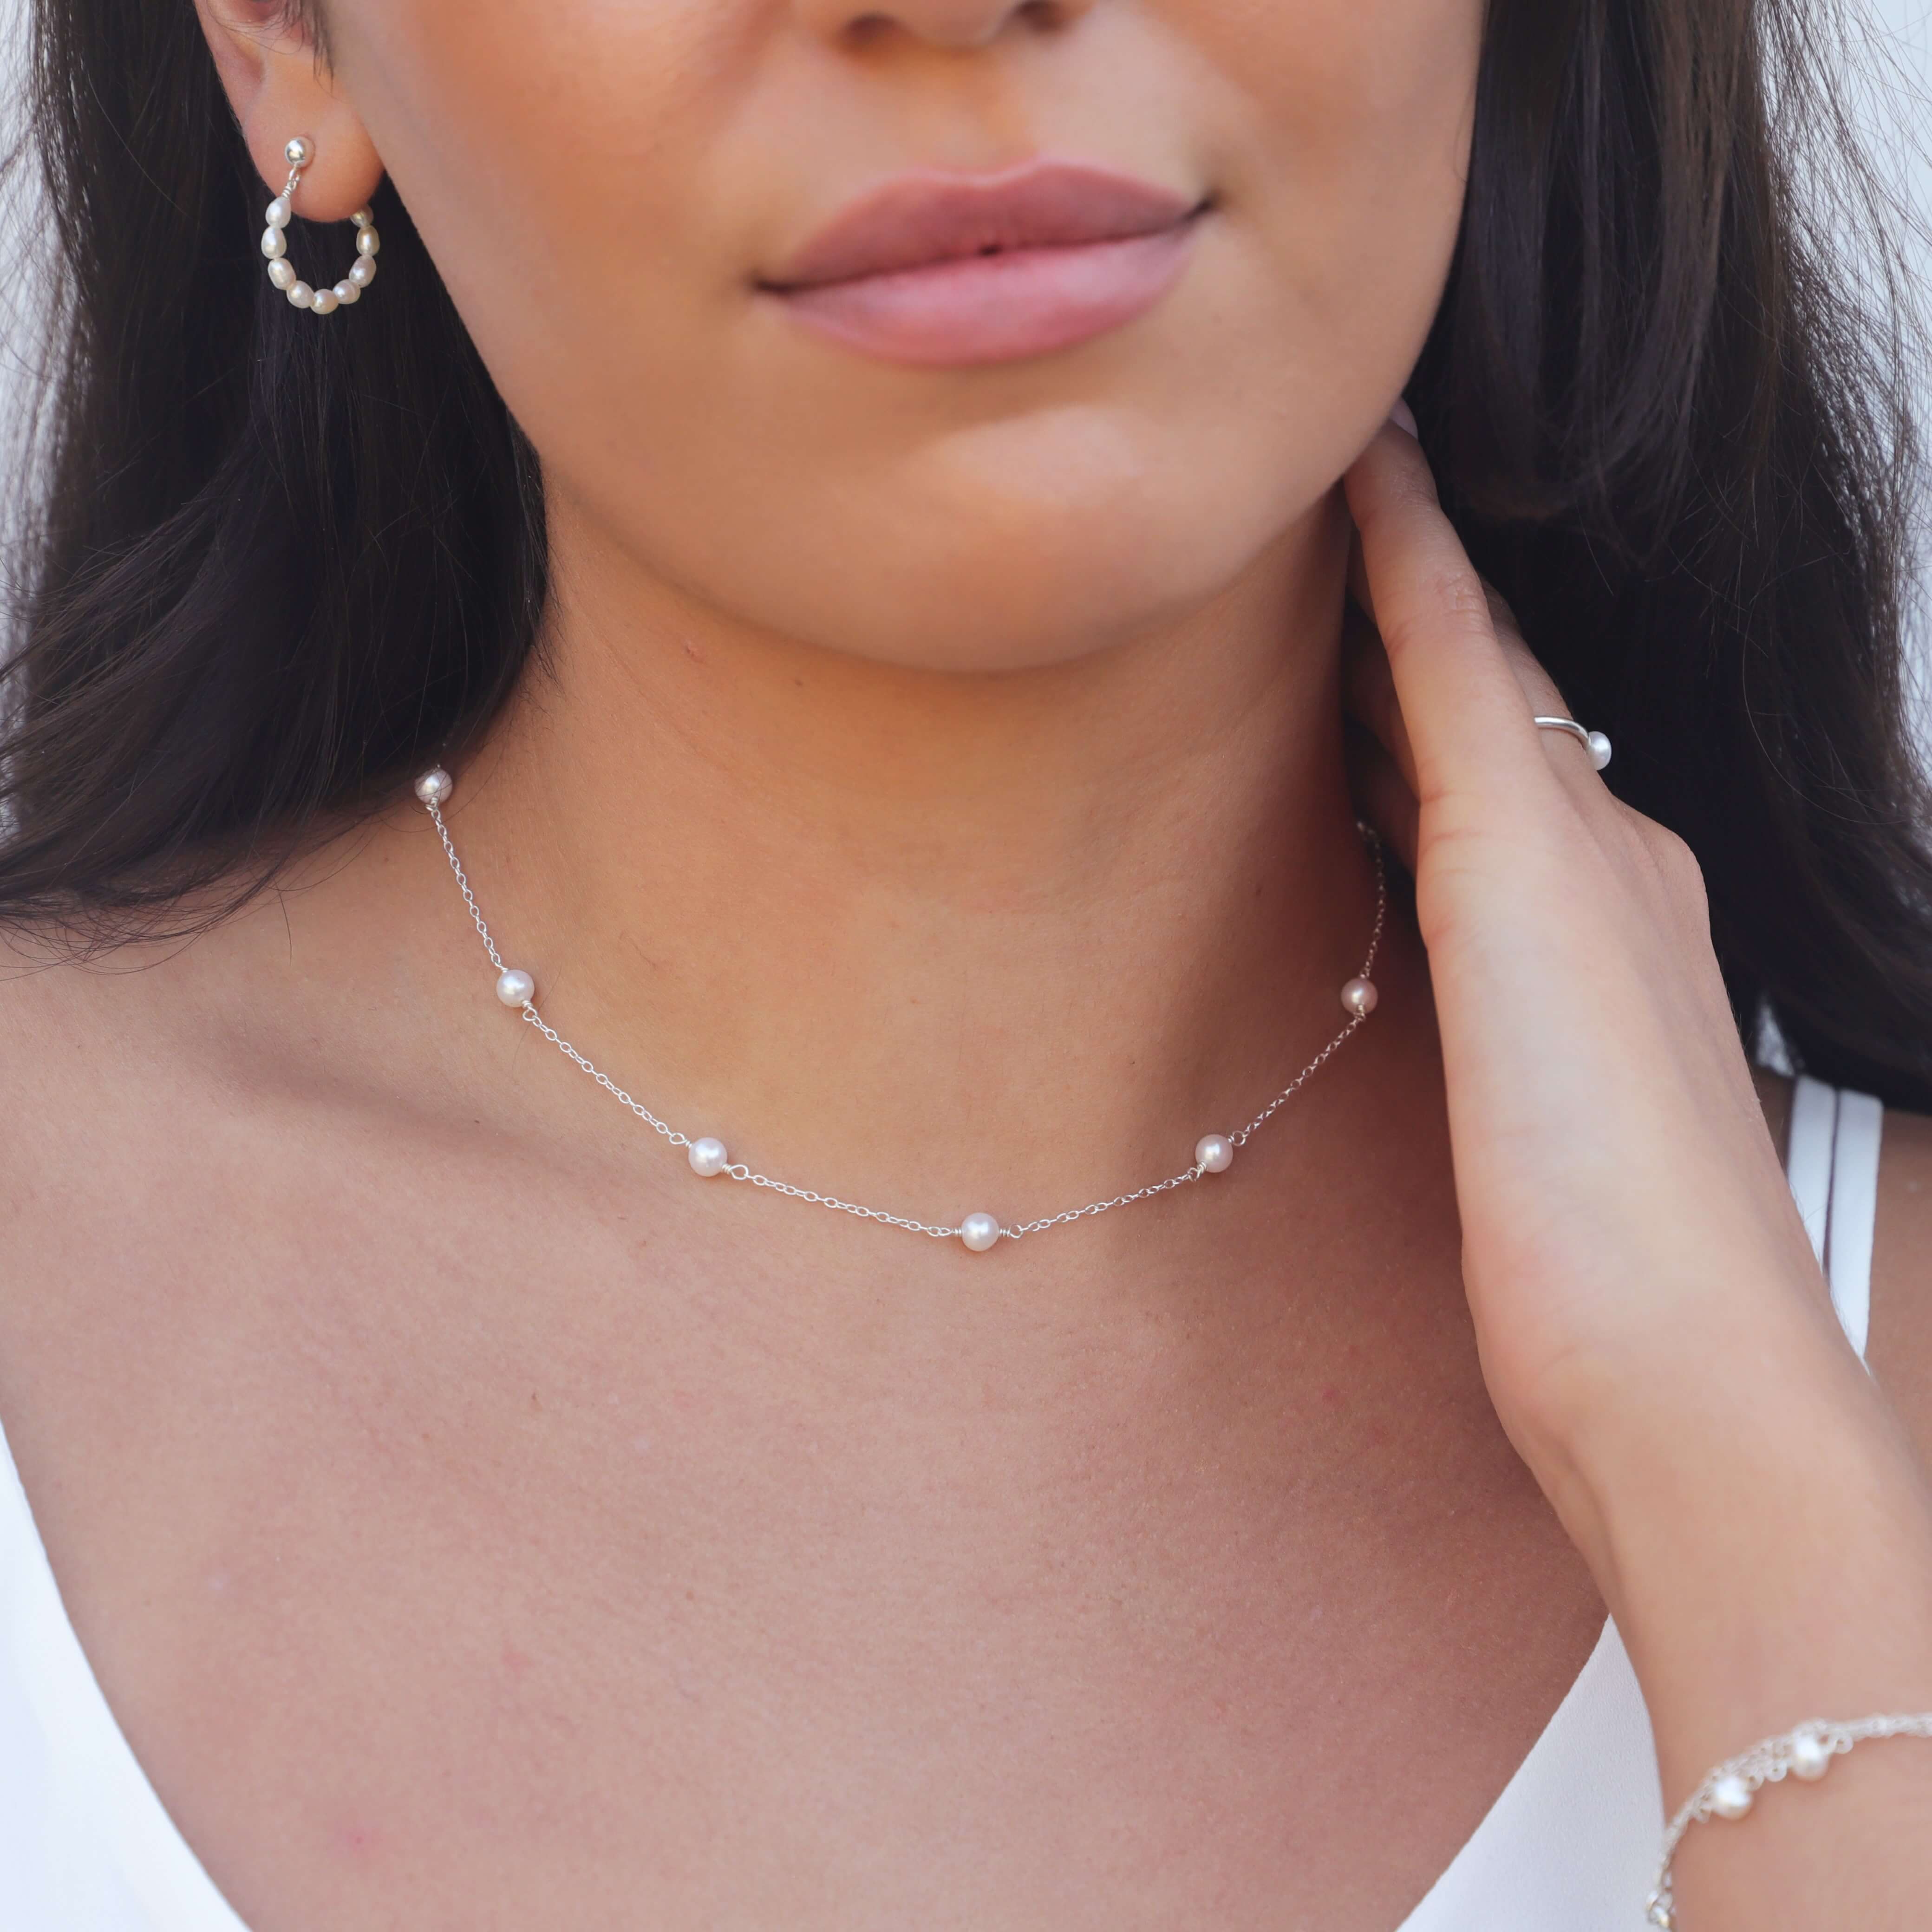 pearl and sterling silver chain necklace on model posing with hand